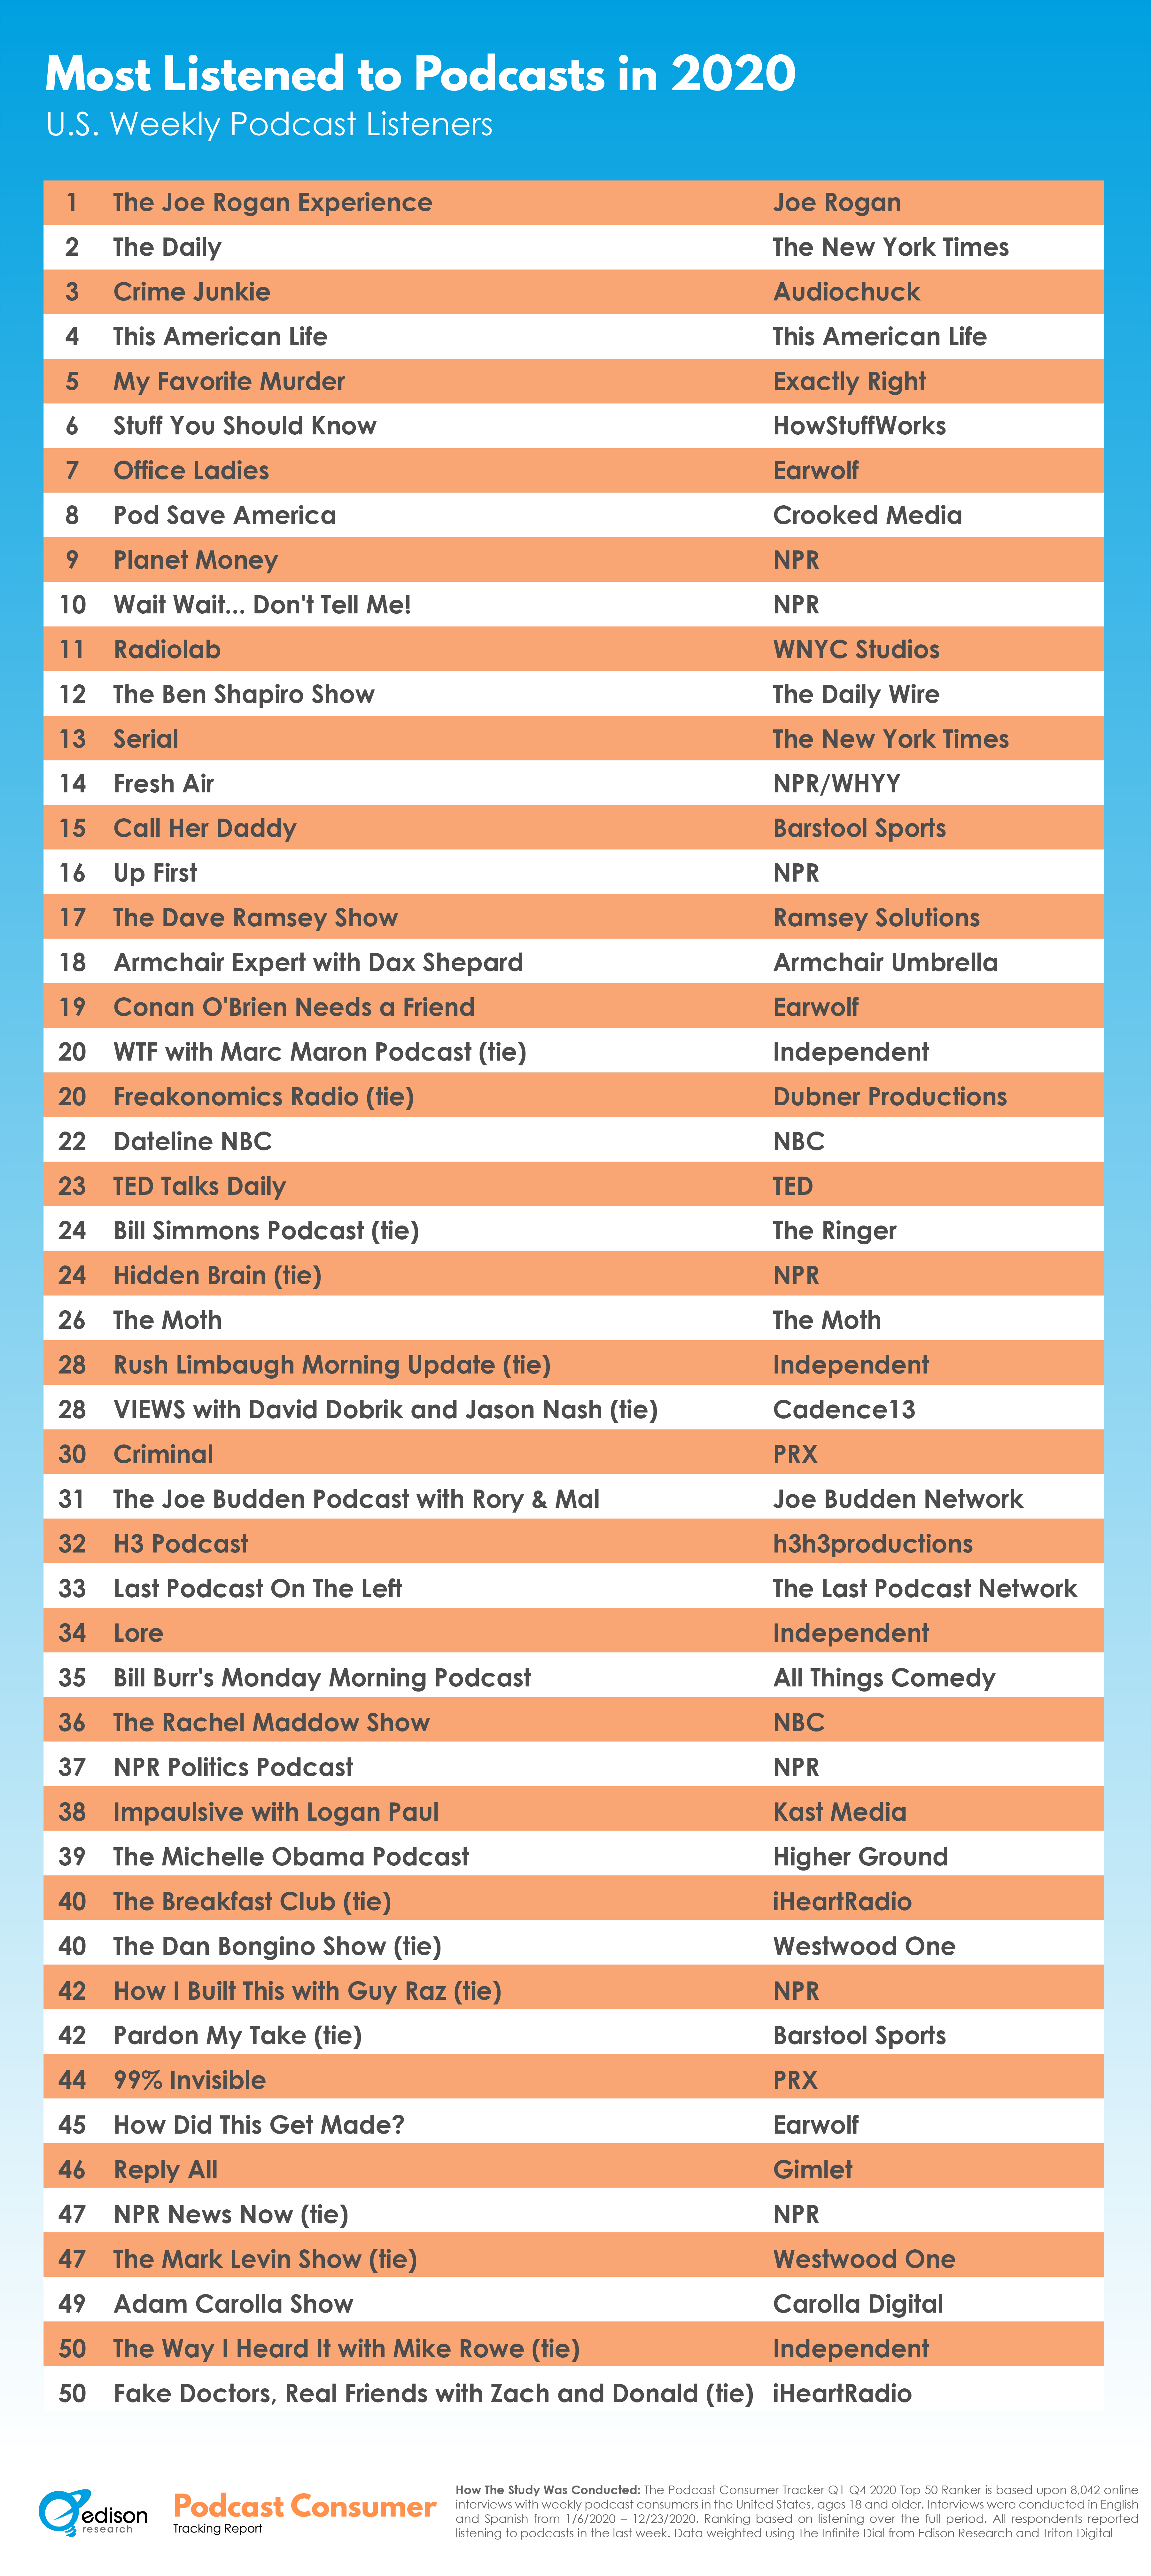 The Top 50 Most Listened to U.S. Podcasts of 2020 - Research